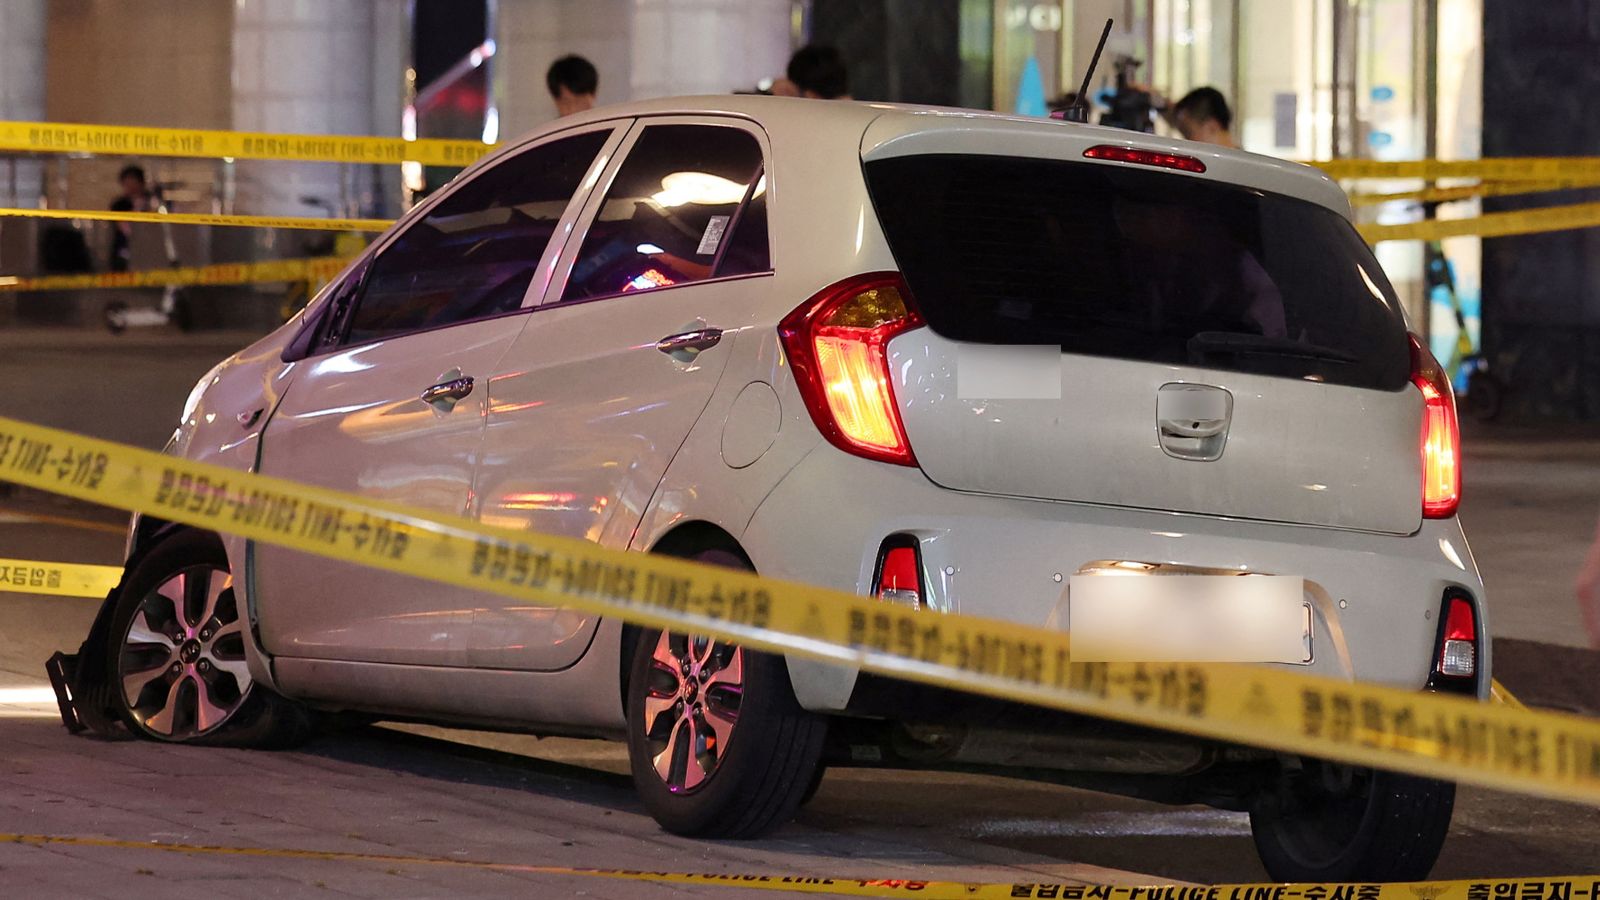 South Korea: 'One dead' and 12 injured after man carries out car and knife attack in Seongnam